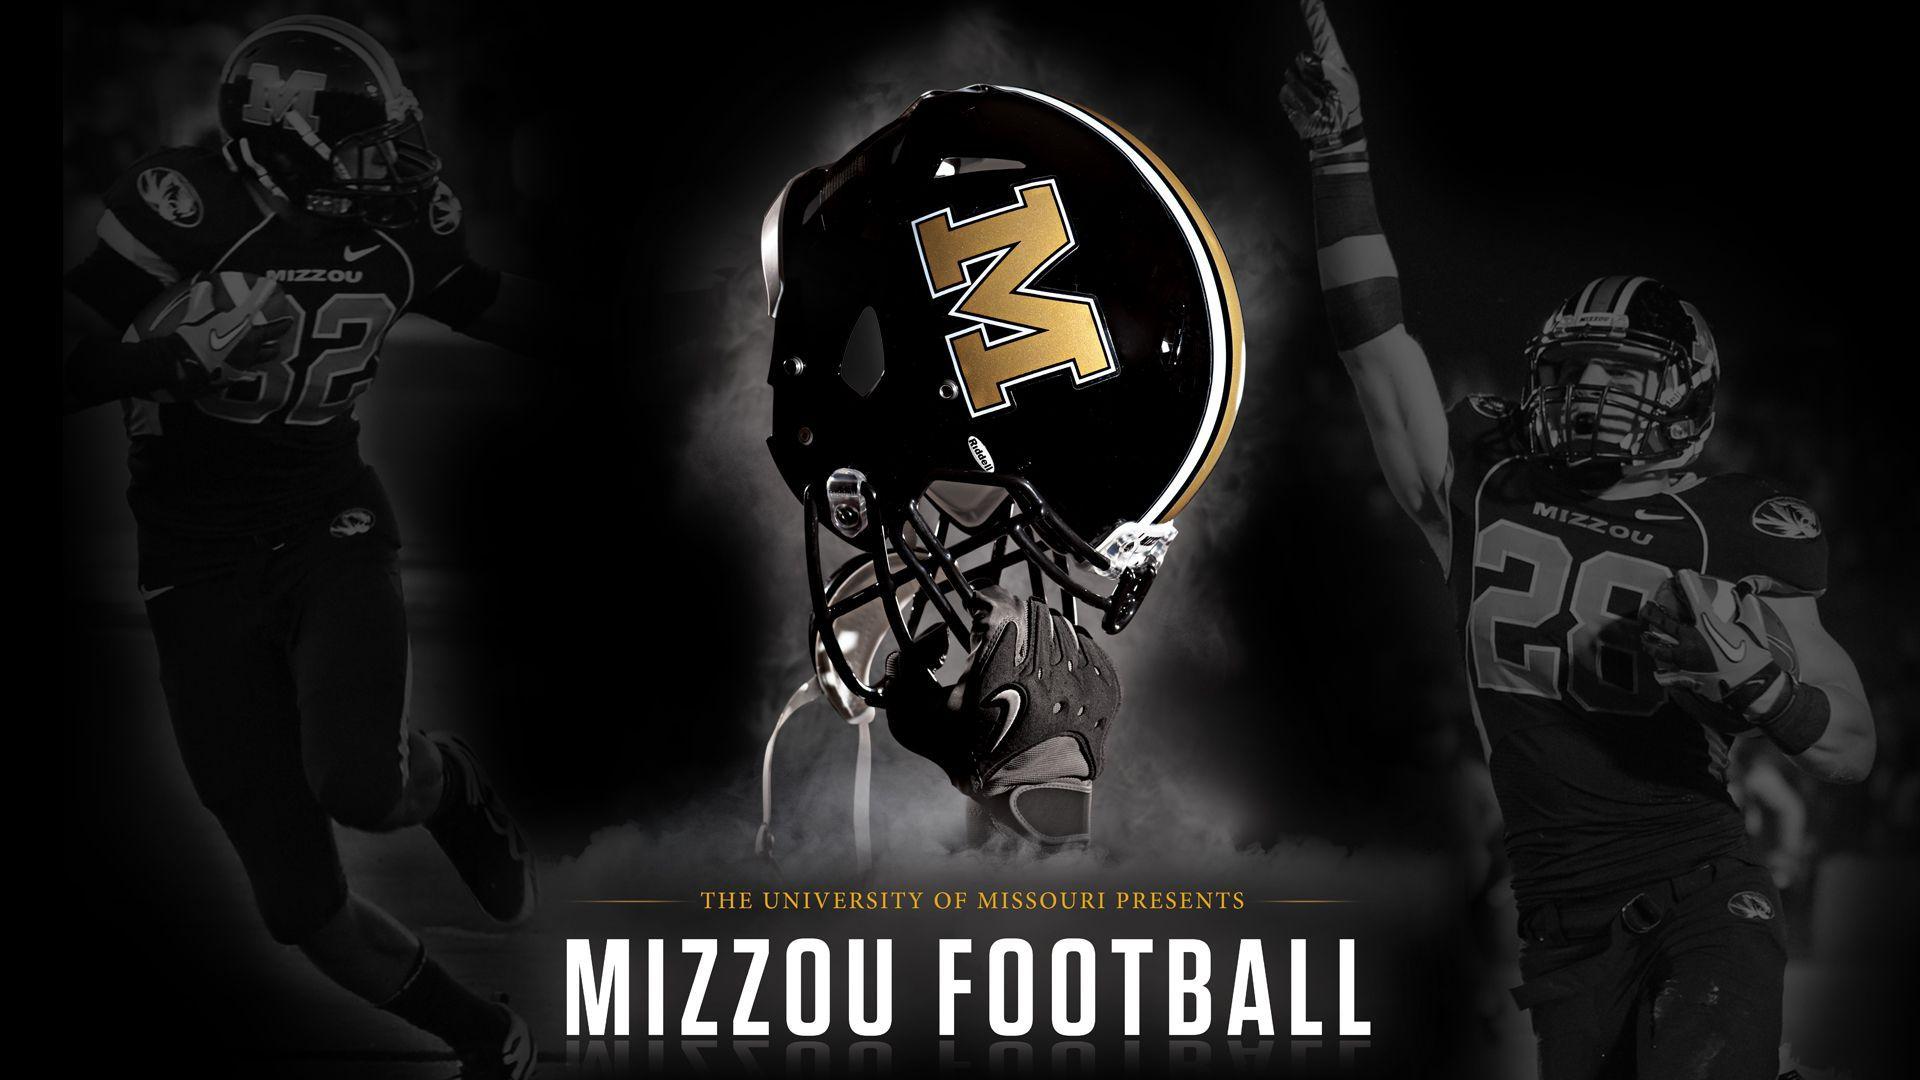 Cool Ultrawide Wallpaper that was meant for Mizzou  rmizzou